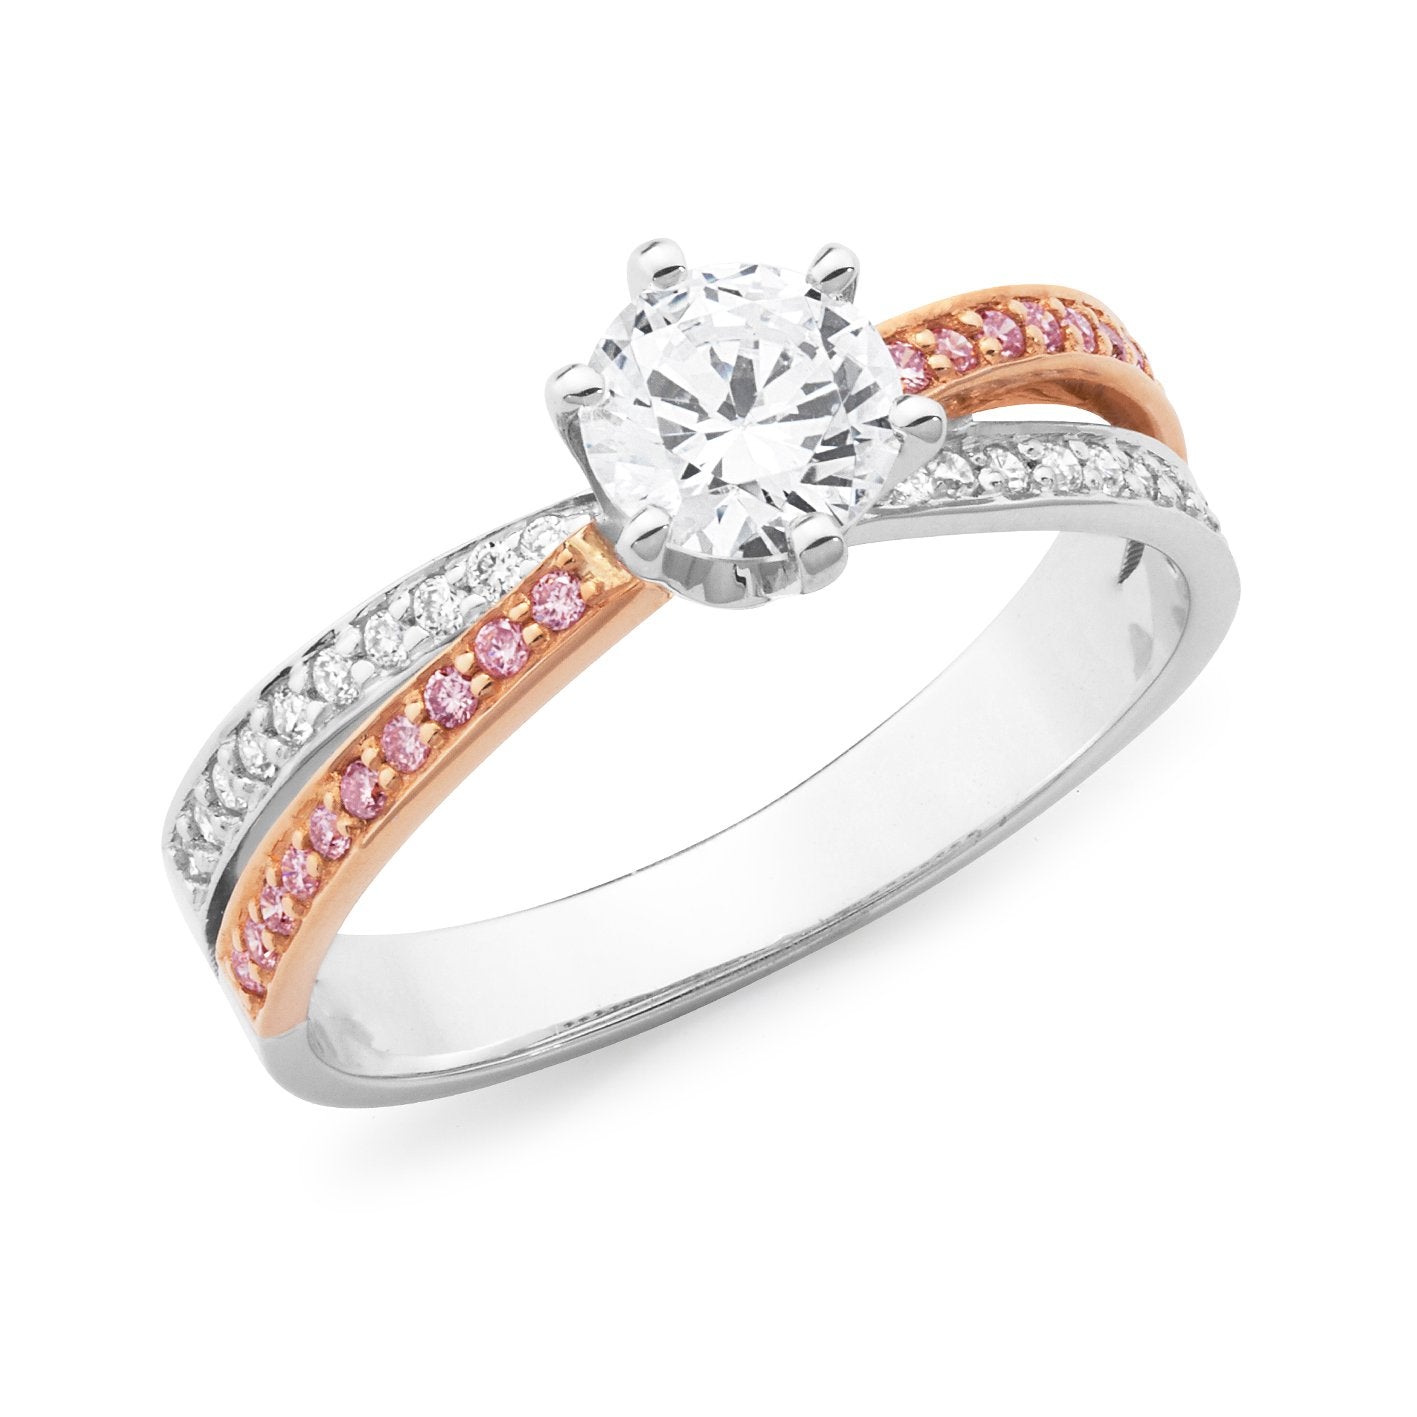 PINK CAVIAR 0.70ct White Round Brilliant Cut & Pink Diamond Engagement Ring in 18ct White Gold